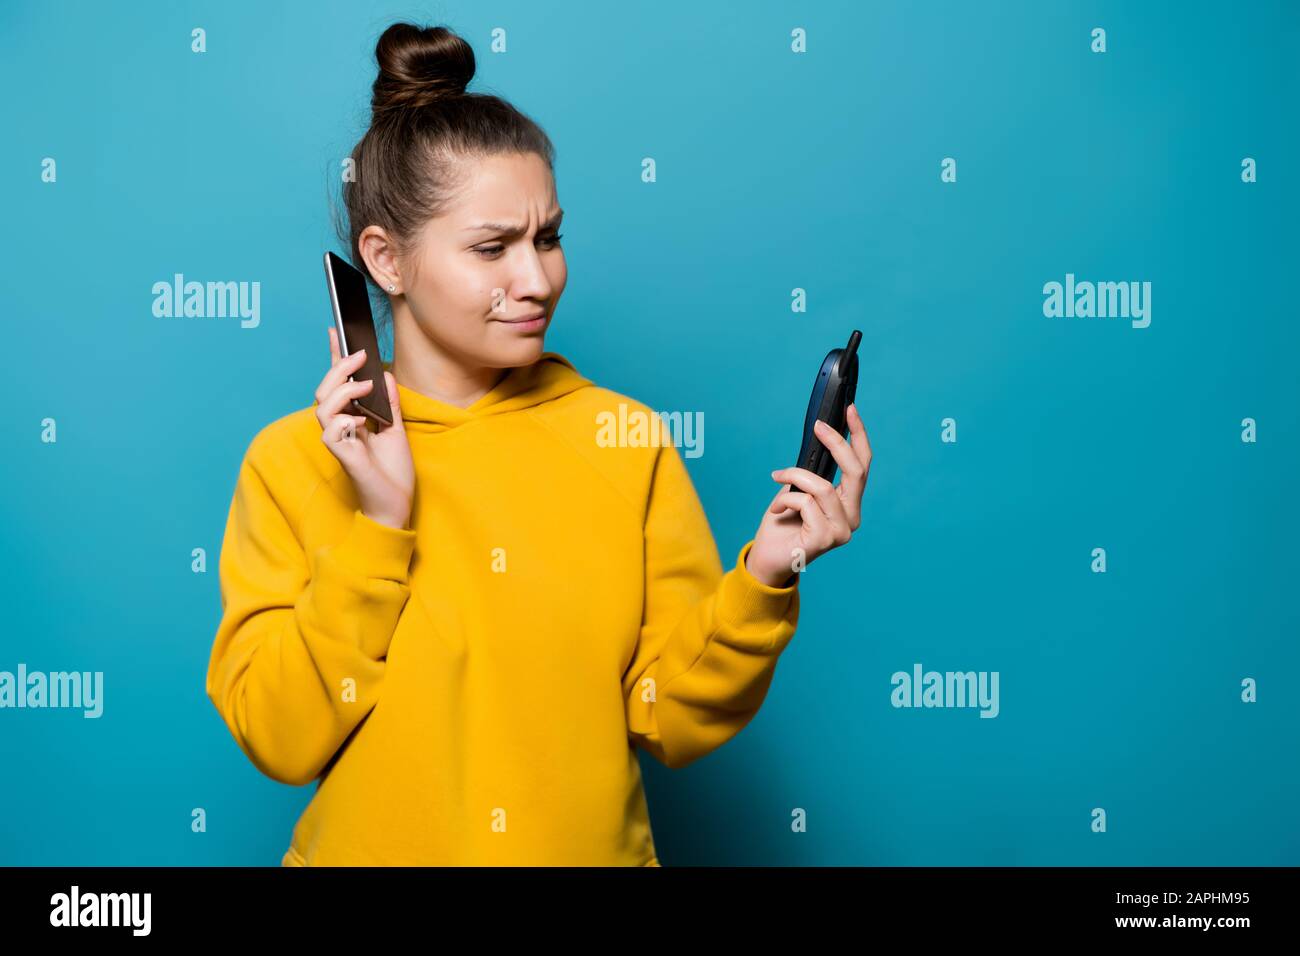 young woman puts a smartphone to her ear and looks at the old push-button telephone with slight indignation Stock Photo